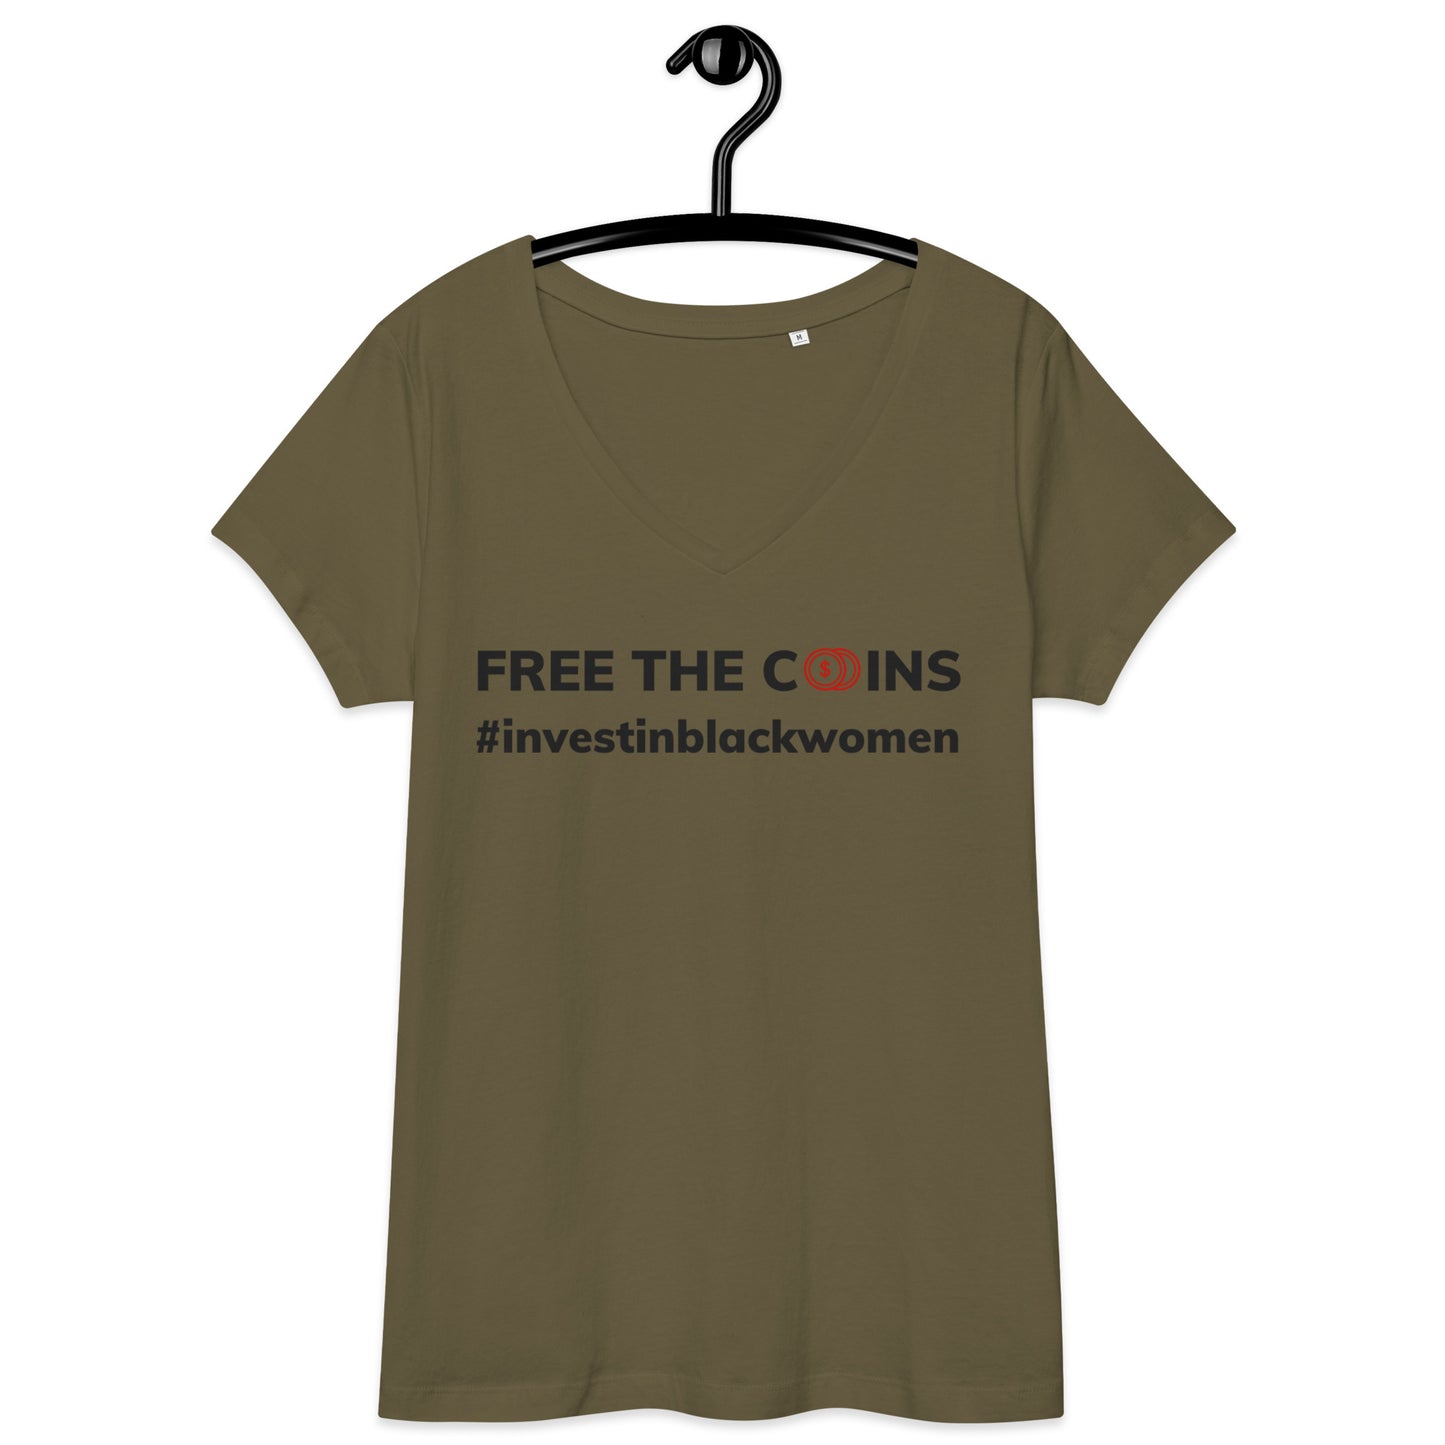 Free the Coins Women’s fitted v-neck t-shirt